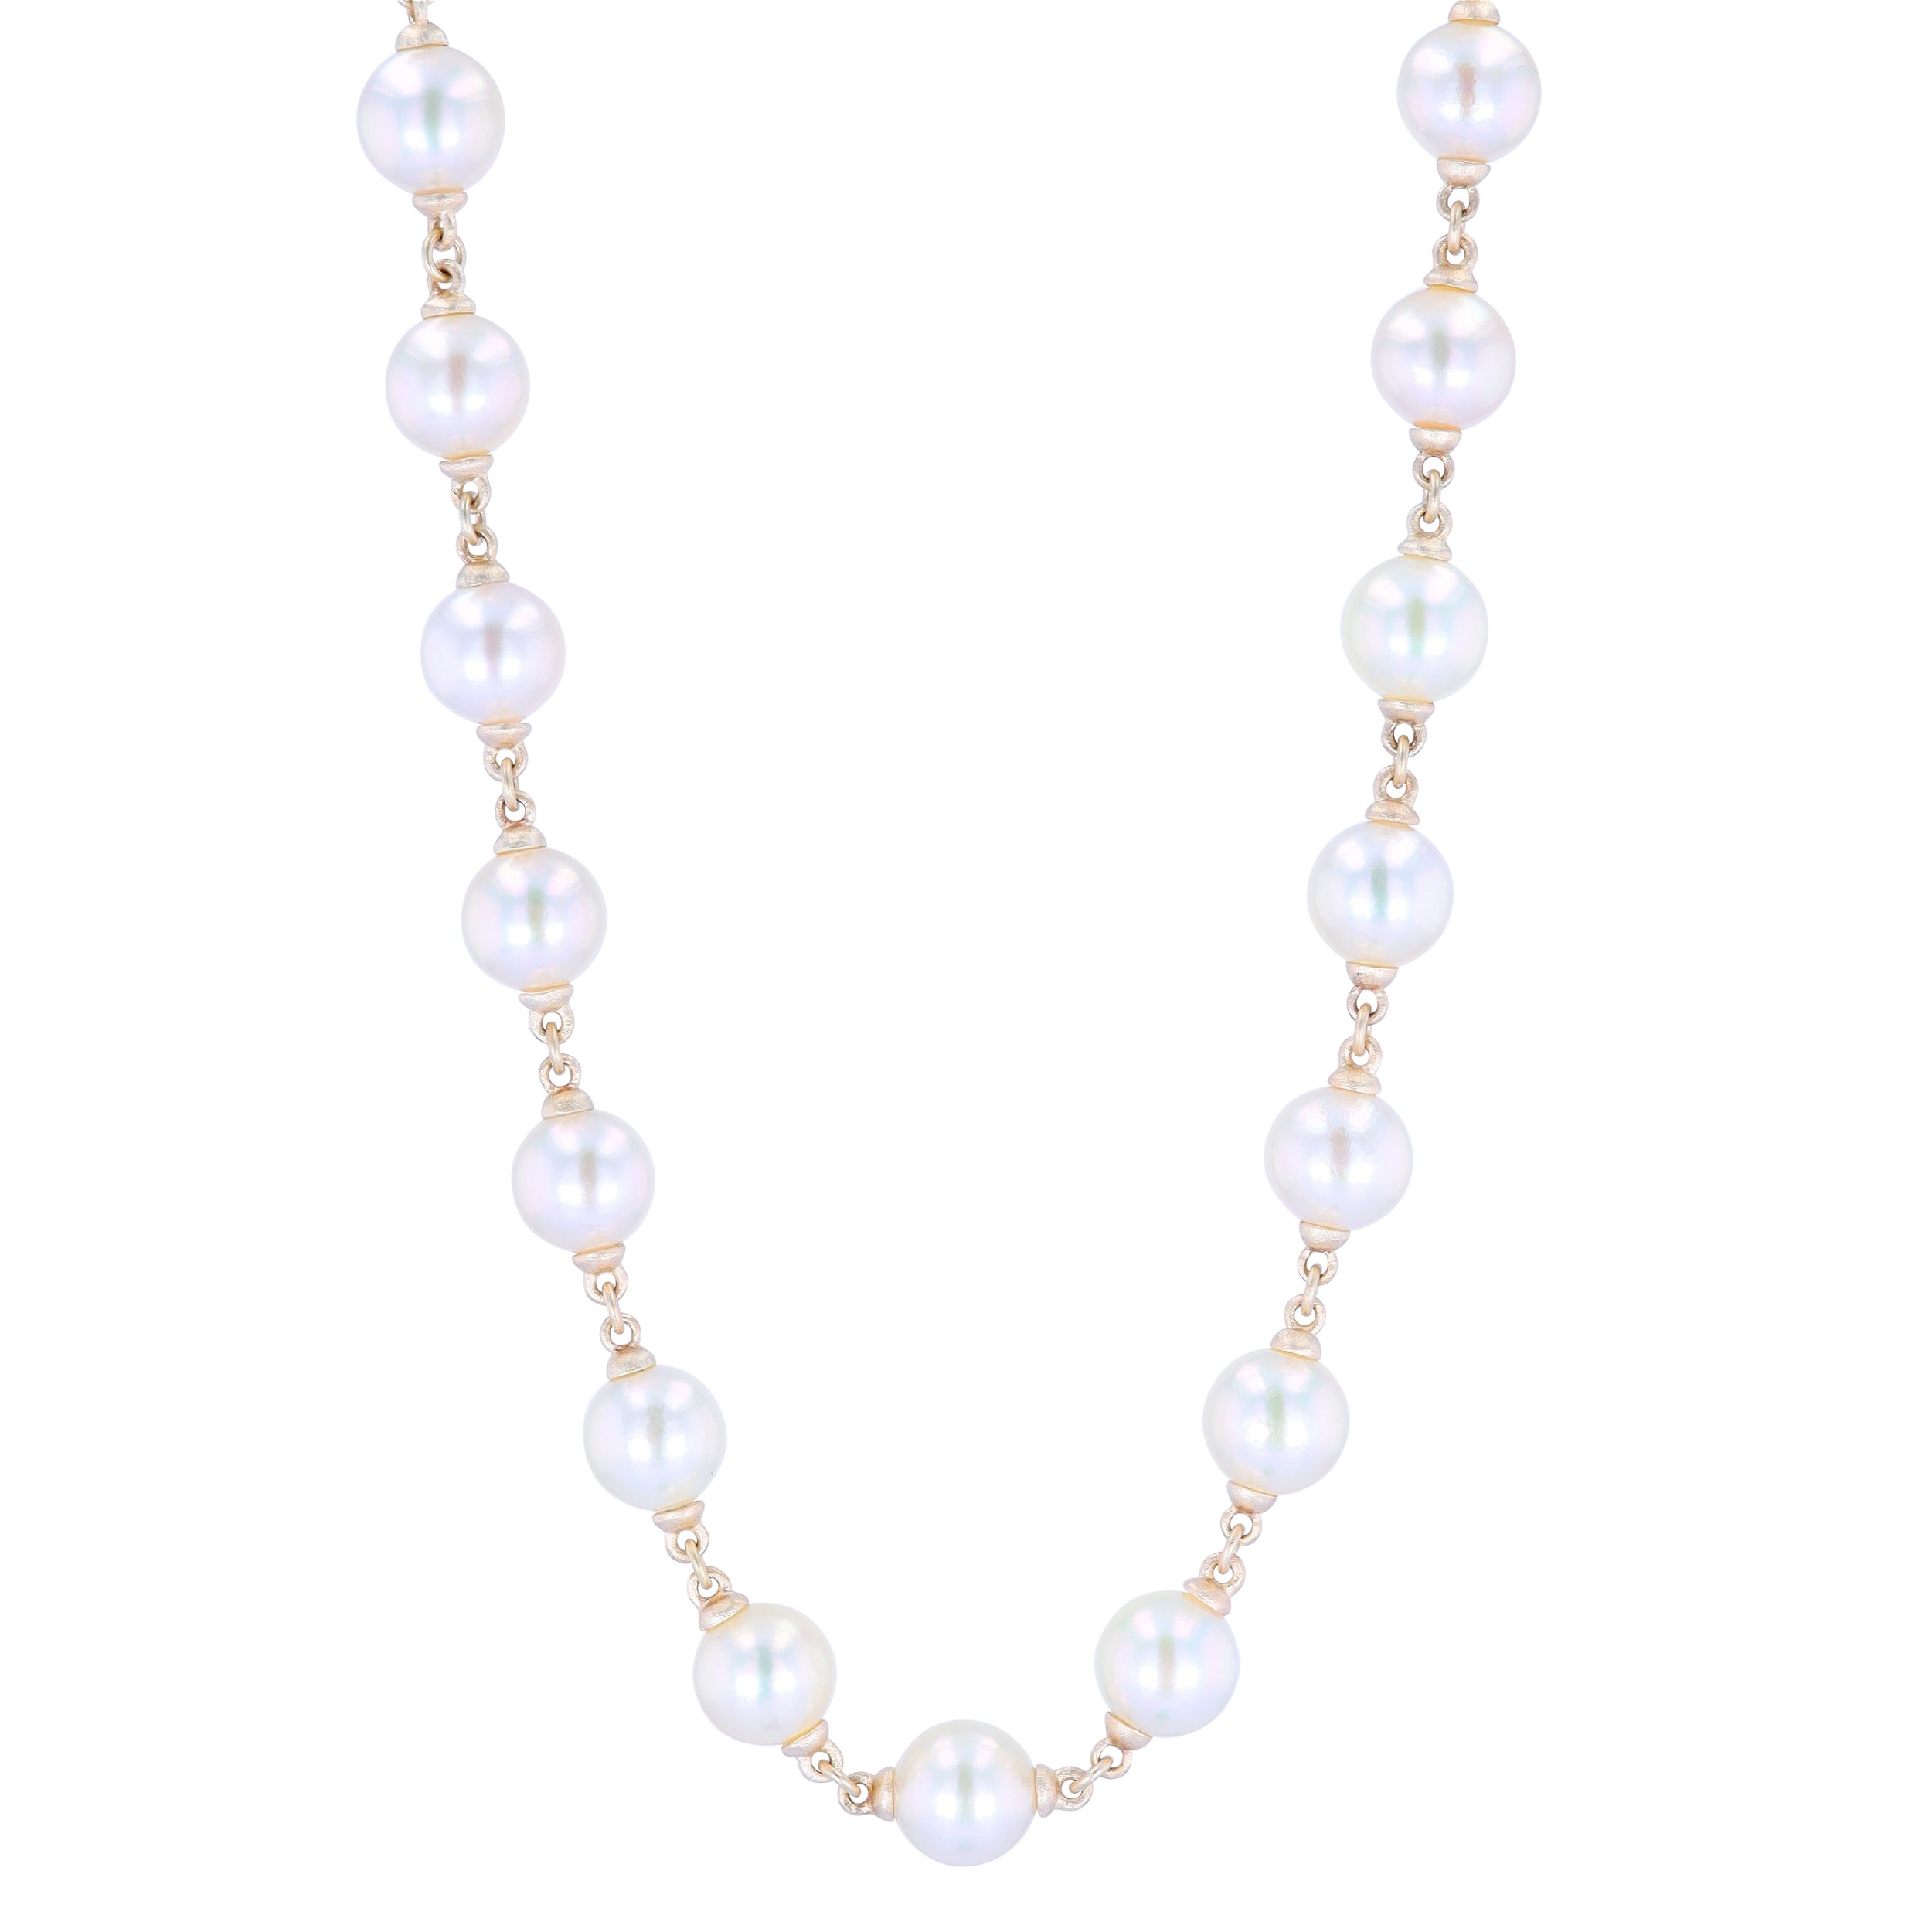 24" 8.5-9mm White Akoya Pearl Necklace